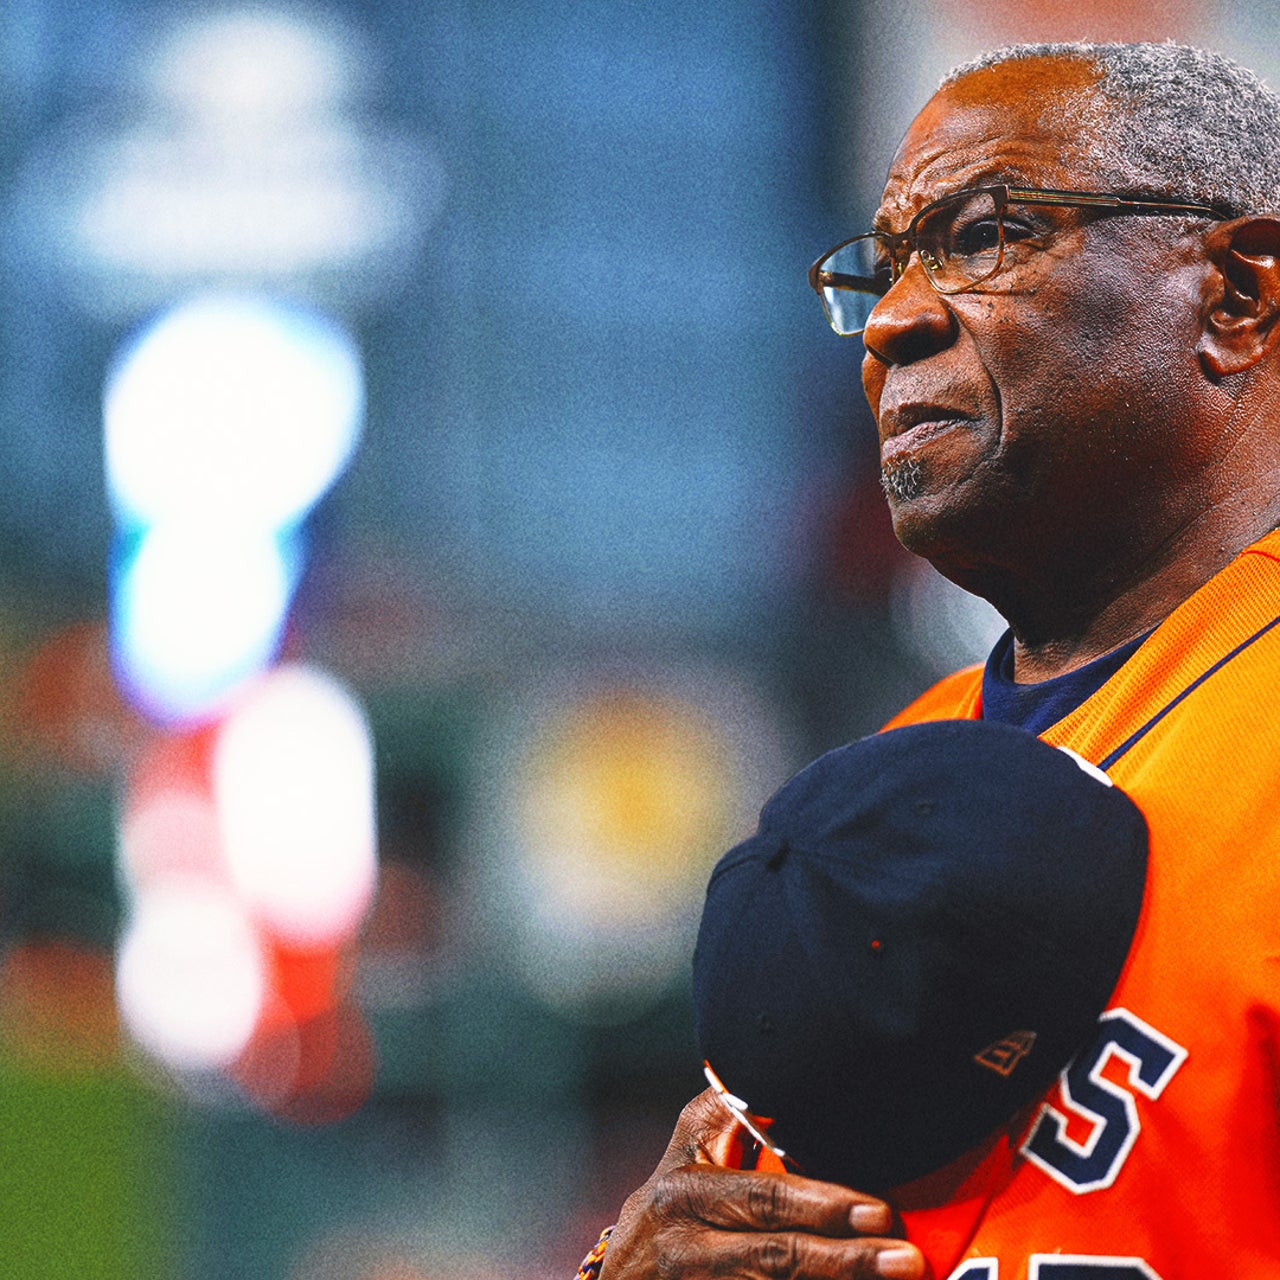 Dusty Baker celebrates Astros win at his West Sacramento winery